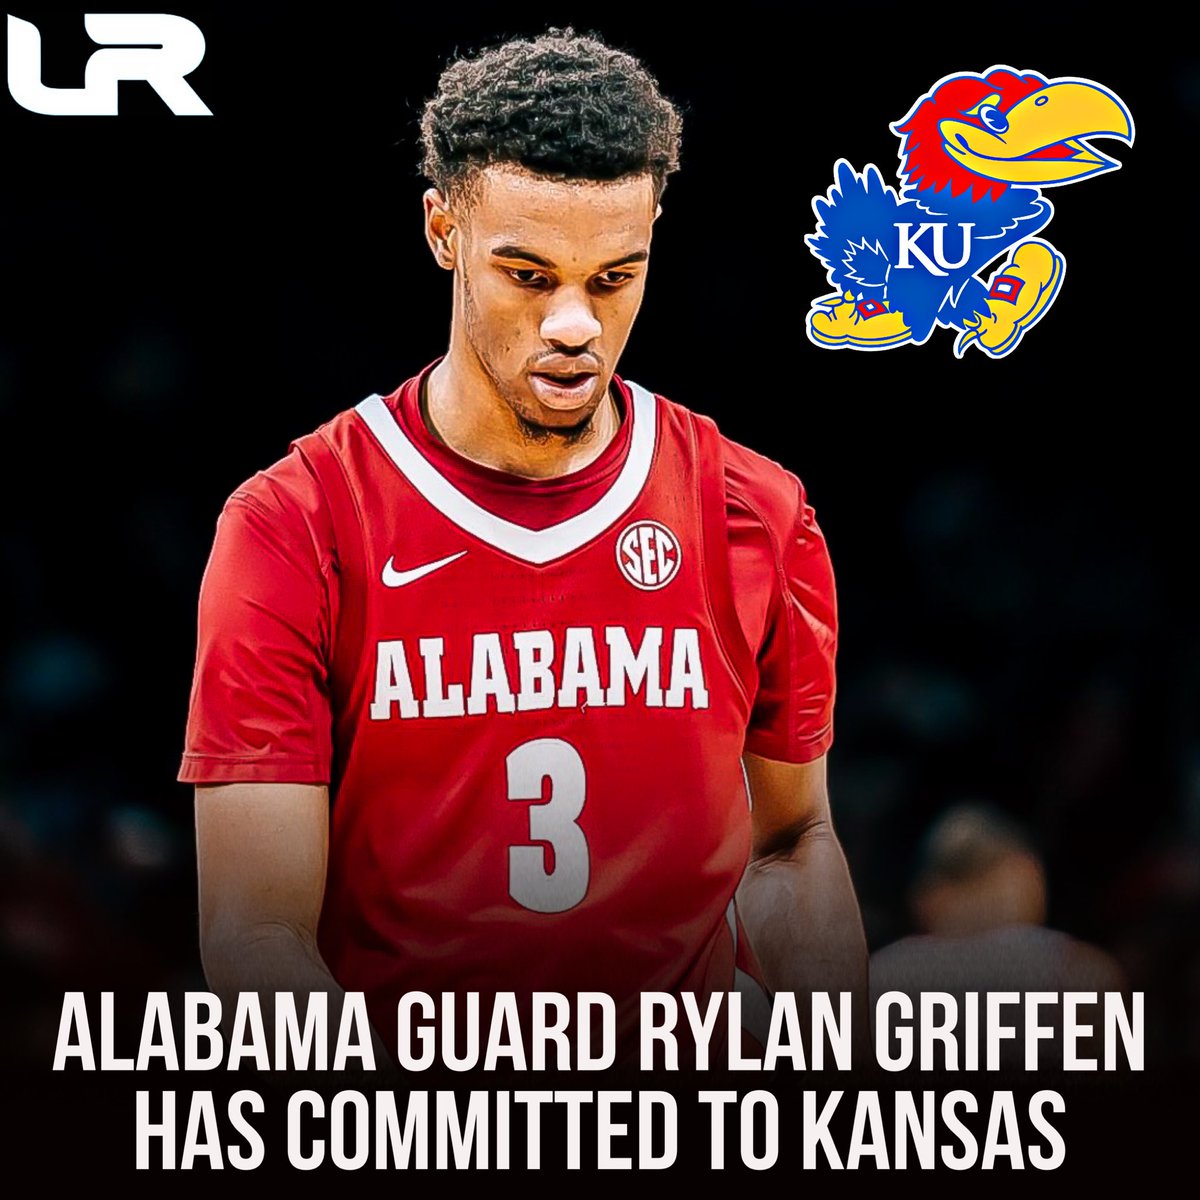 NEWS: Alabama transfer Rylan Griffen has committed to Kansas and Bill Self. First by @jeffborzello. Griffen is a native of Dallas, Texas who has spent the last two seasons at Alabama. He’s a former 4⭐️ recruit. He averaged 11.2PPG, 3.4RPG and 1.9APG this season. Shot 39.2% from…